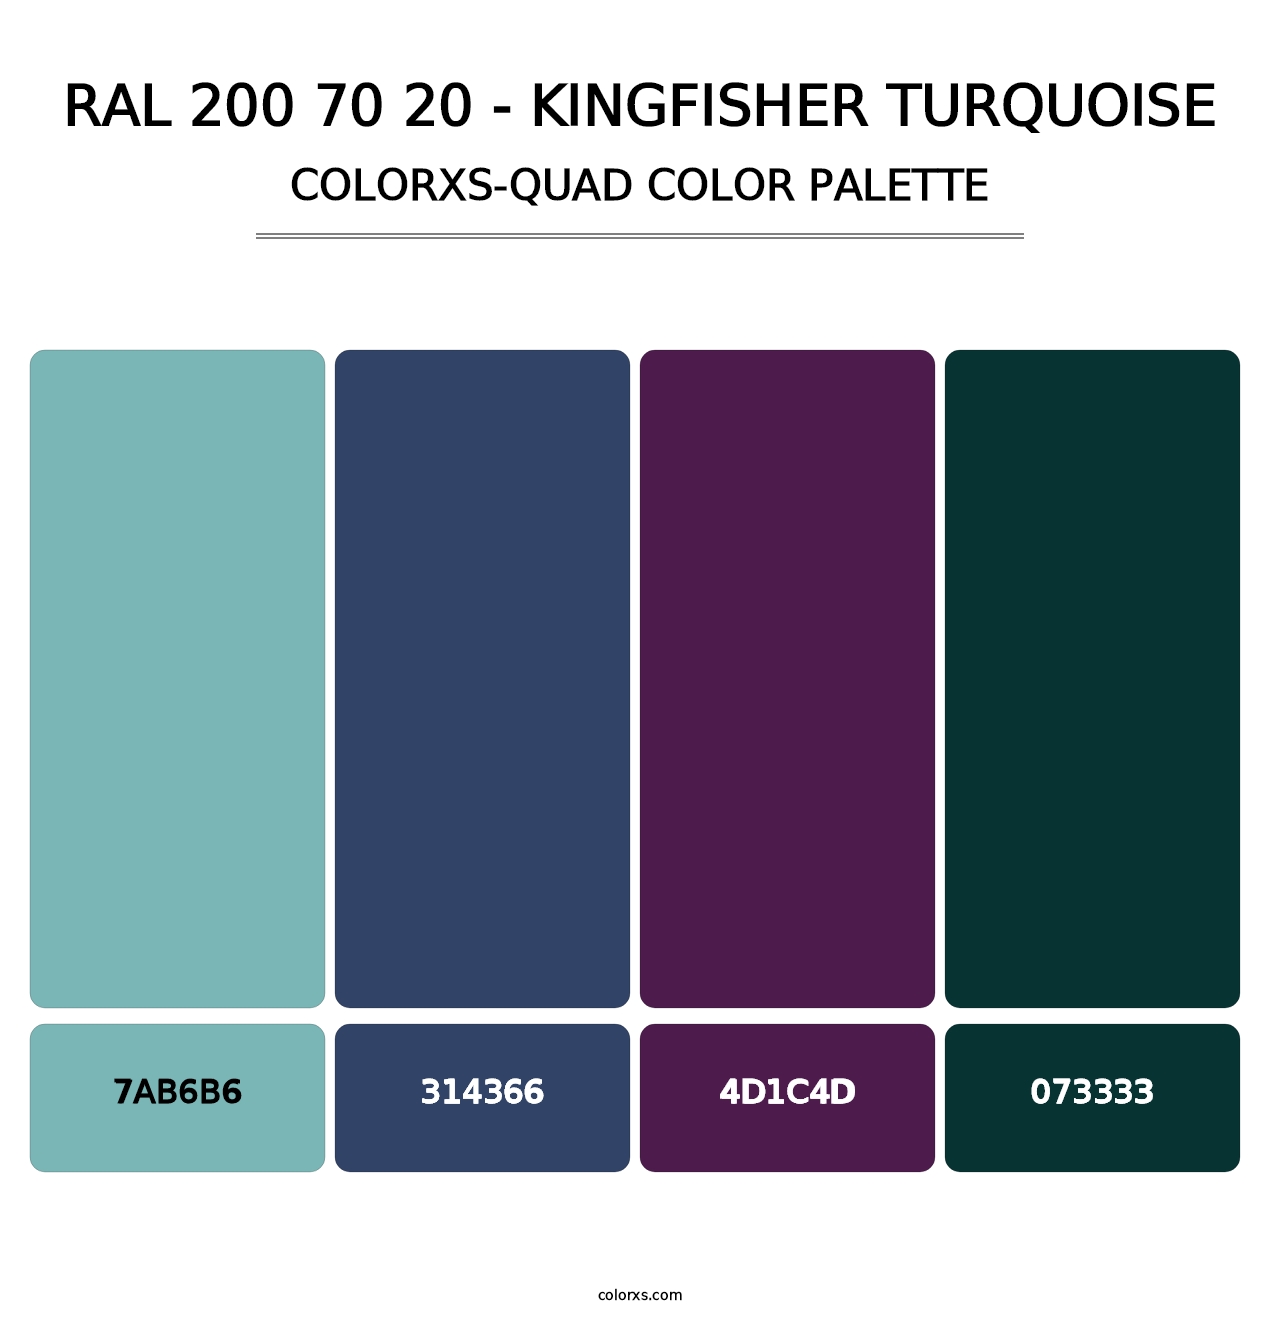 RAL 200 70 20 - Kingfisher Turquoise - Colorxs Quad Palette